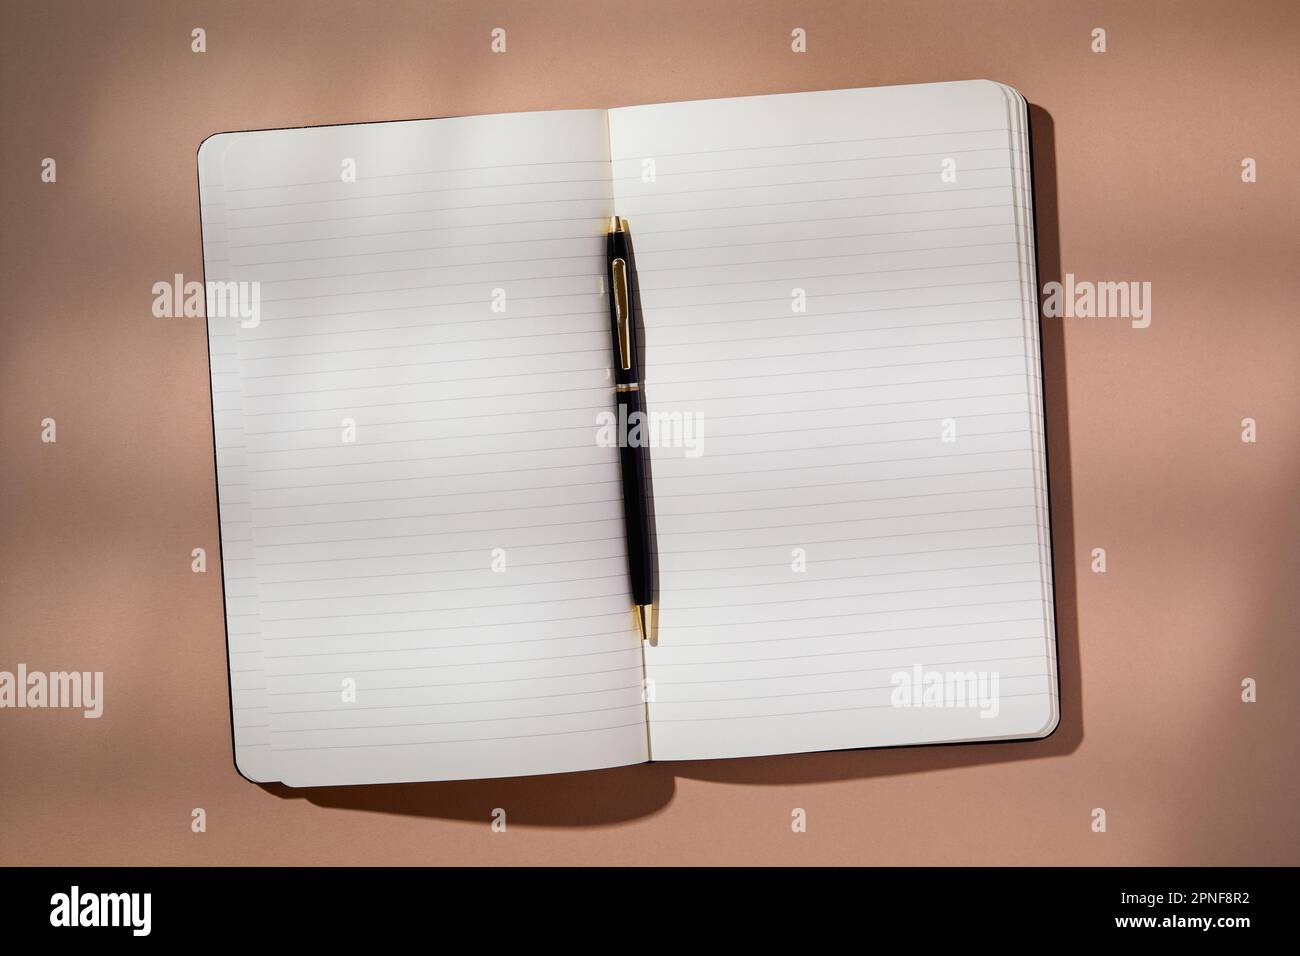 Pen in open notebook on brown background Stock Photo